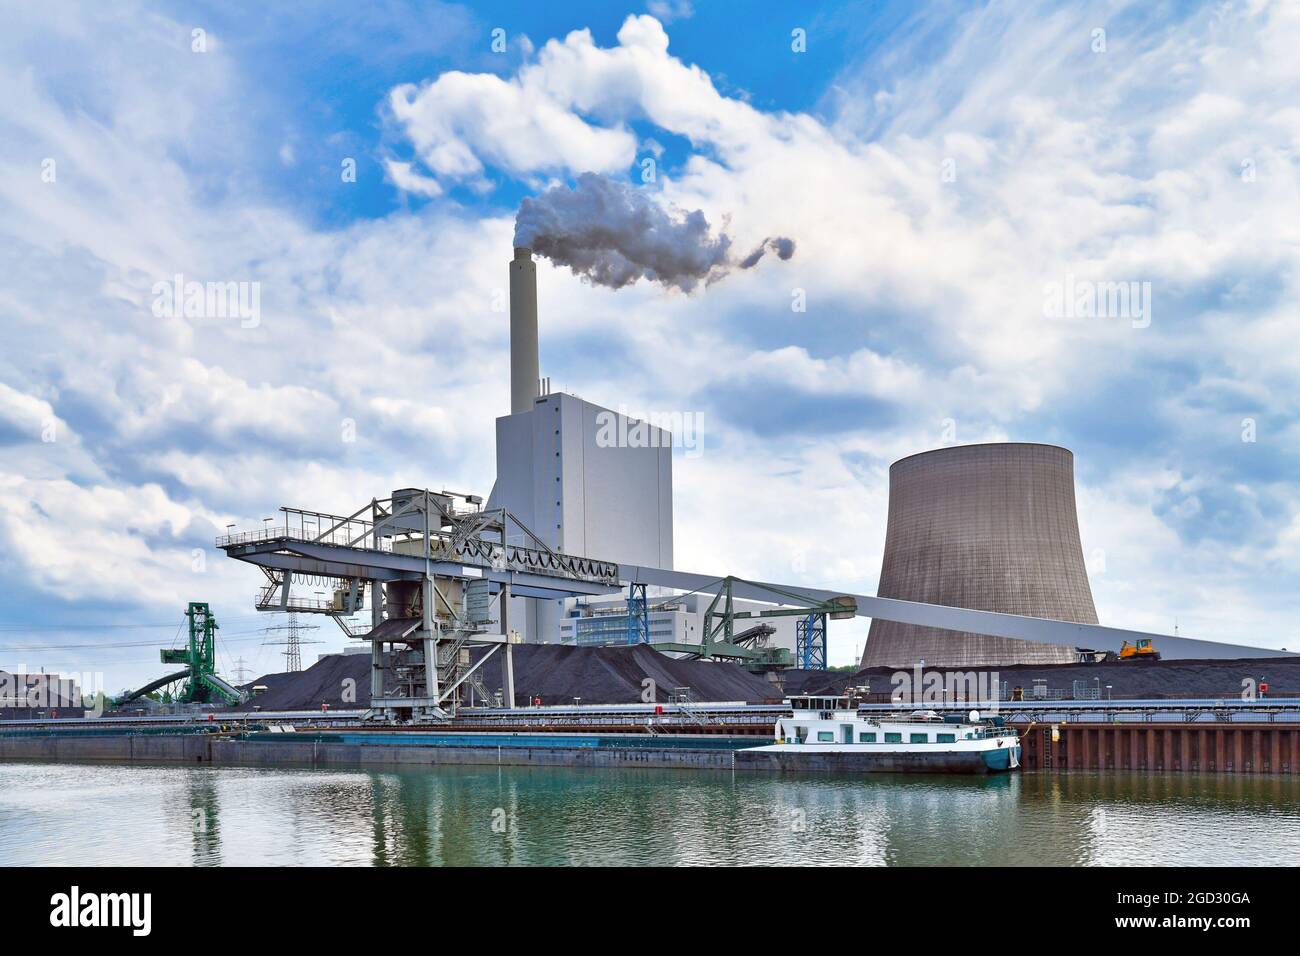 Coal steam power plant in Karlsruhe in Germany used for generation of electricity and district heating from hard coal Stock Photo